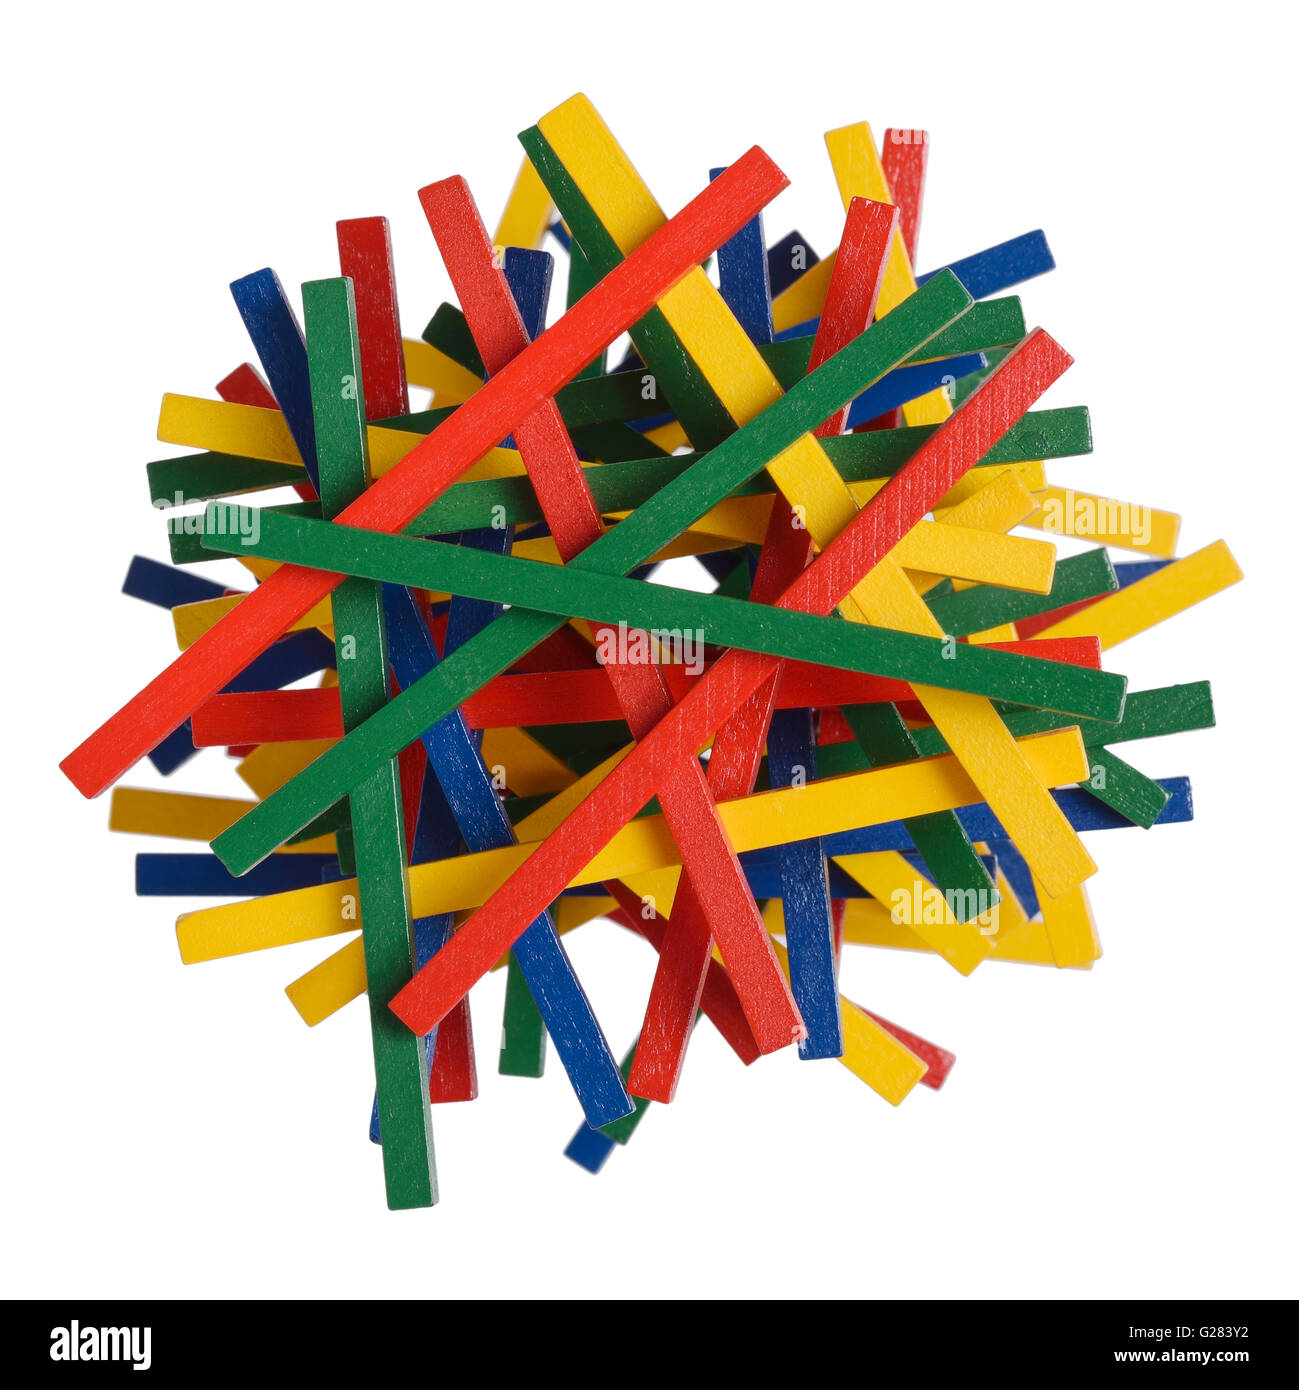 Stack of coloured wooden sticks Stock Photo